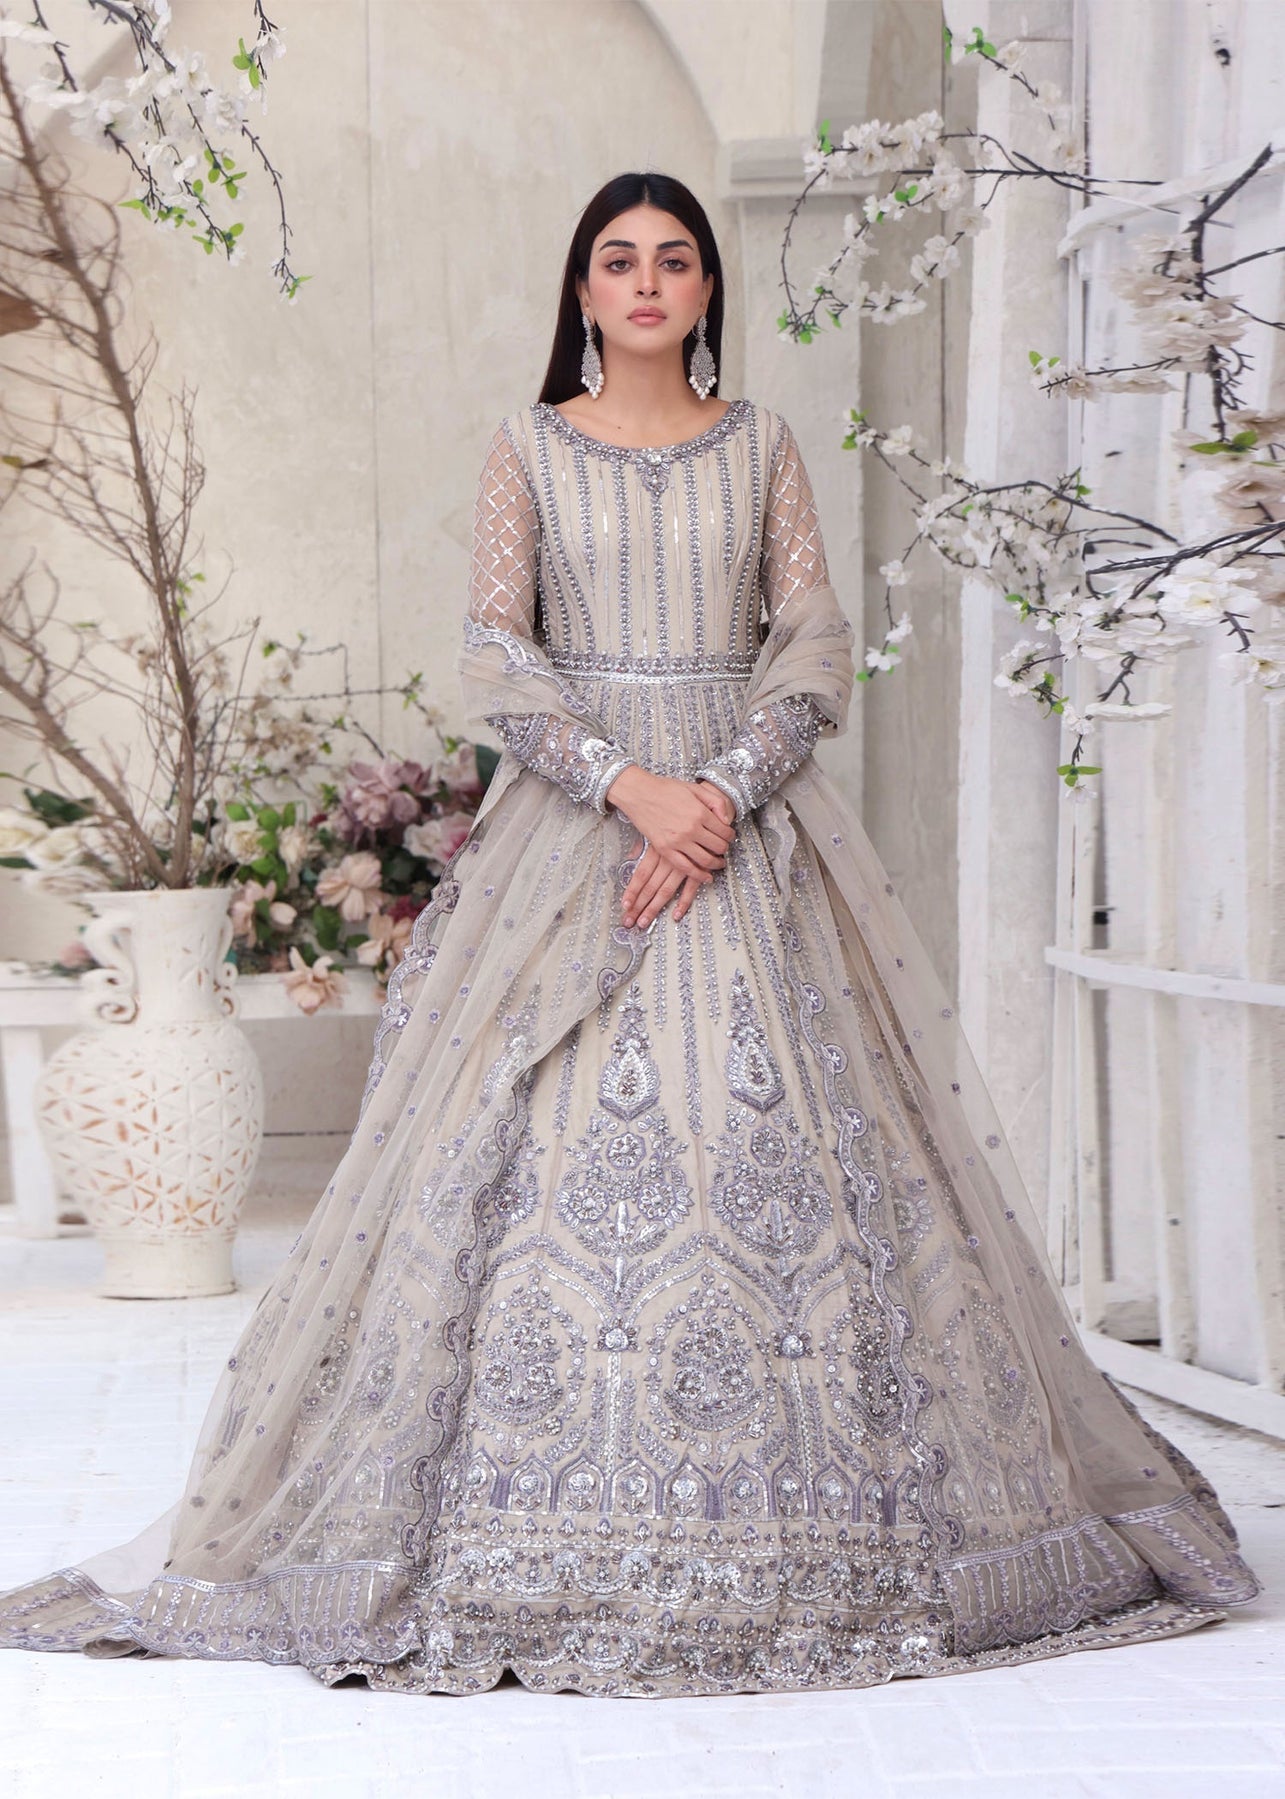 Buy Cream Anarkali Suit With Zardozi Embroidered Neckline And A Yellow  Floral Printed Dupatta Online - Kalki Fashion